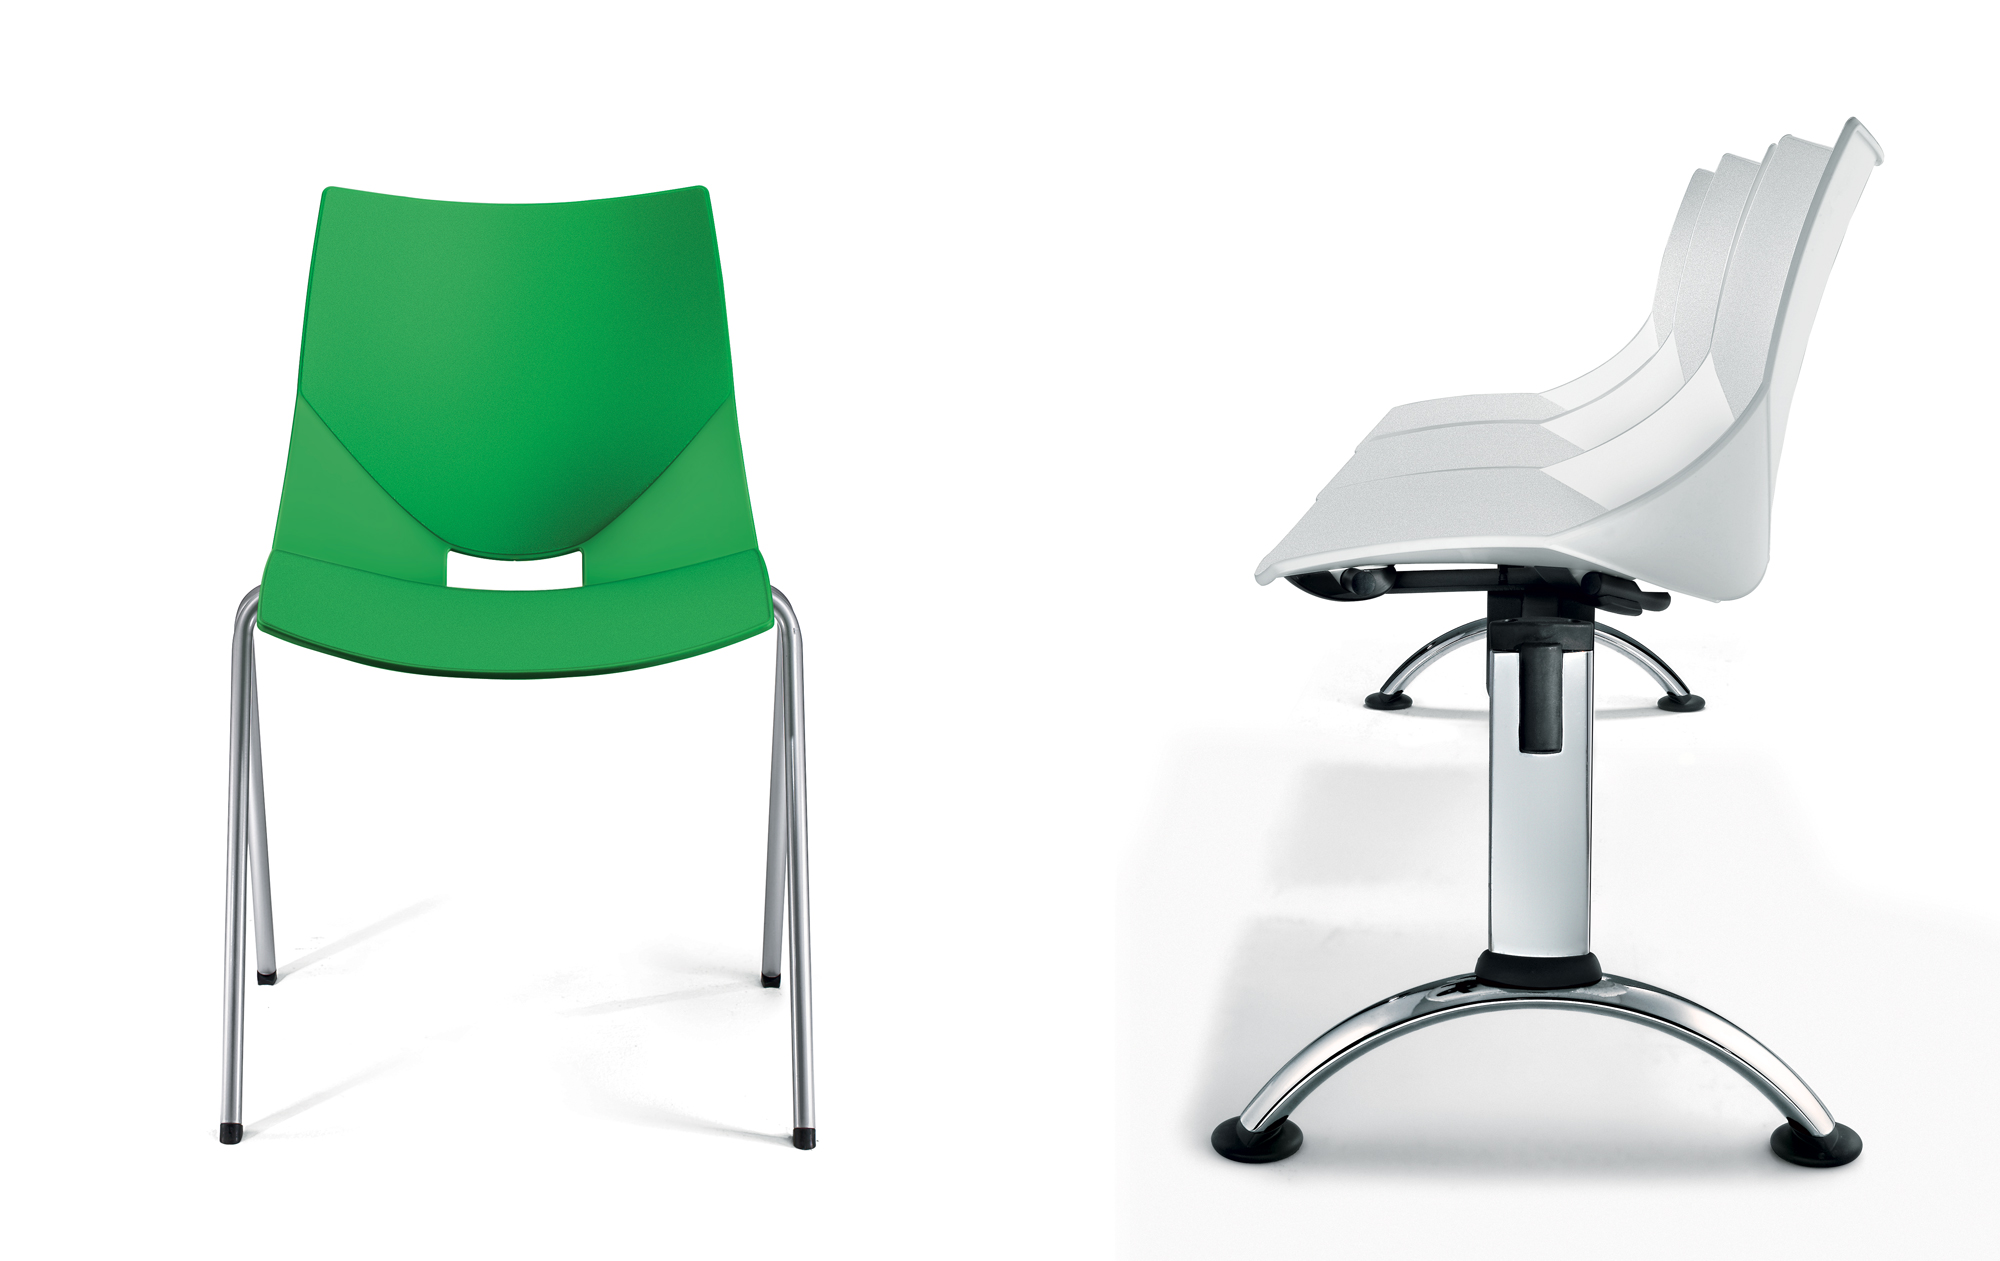 Shell - Meeting, conference and waiting room chairs - Cerantola - 7